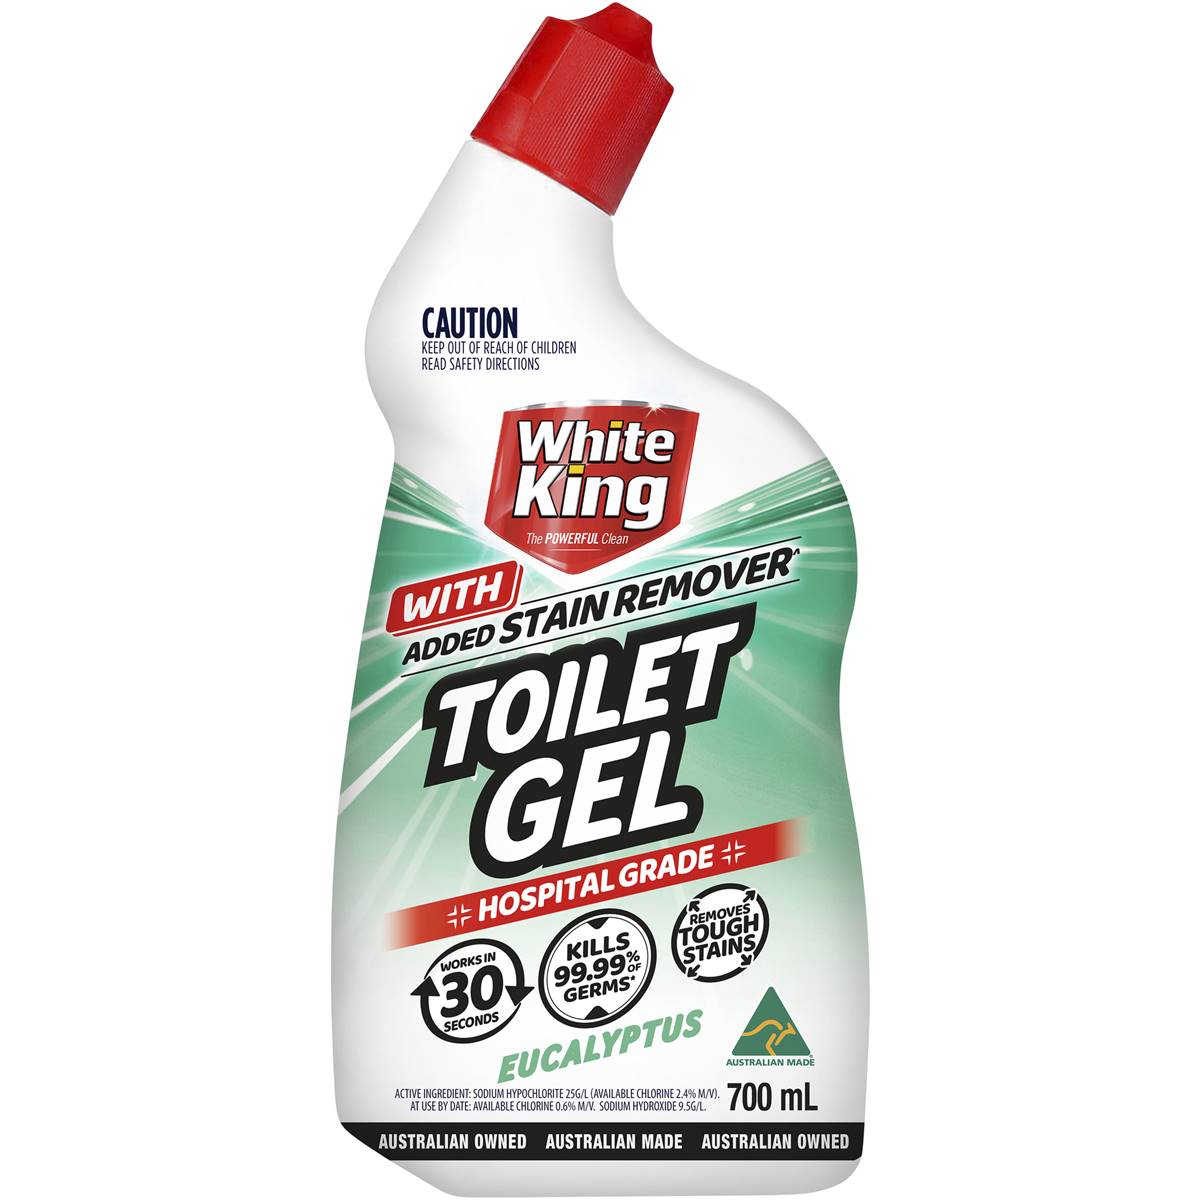 White King Toilet Gel With Added Stain Remover Eucalyptus 700ml